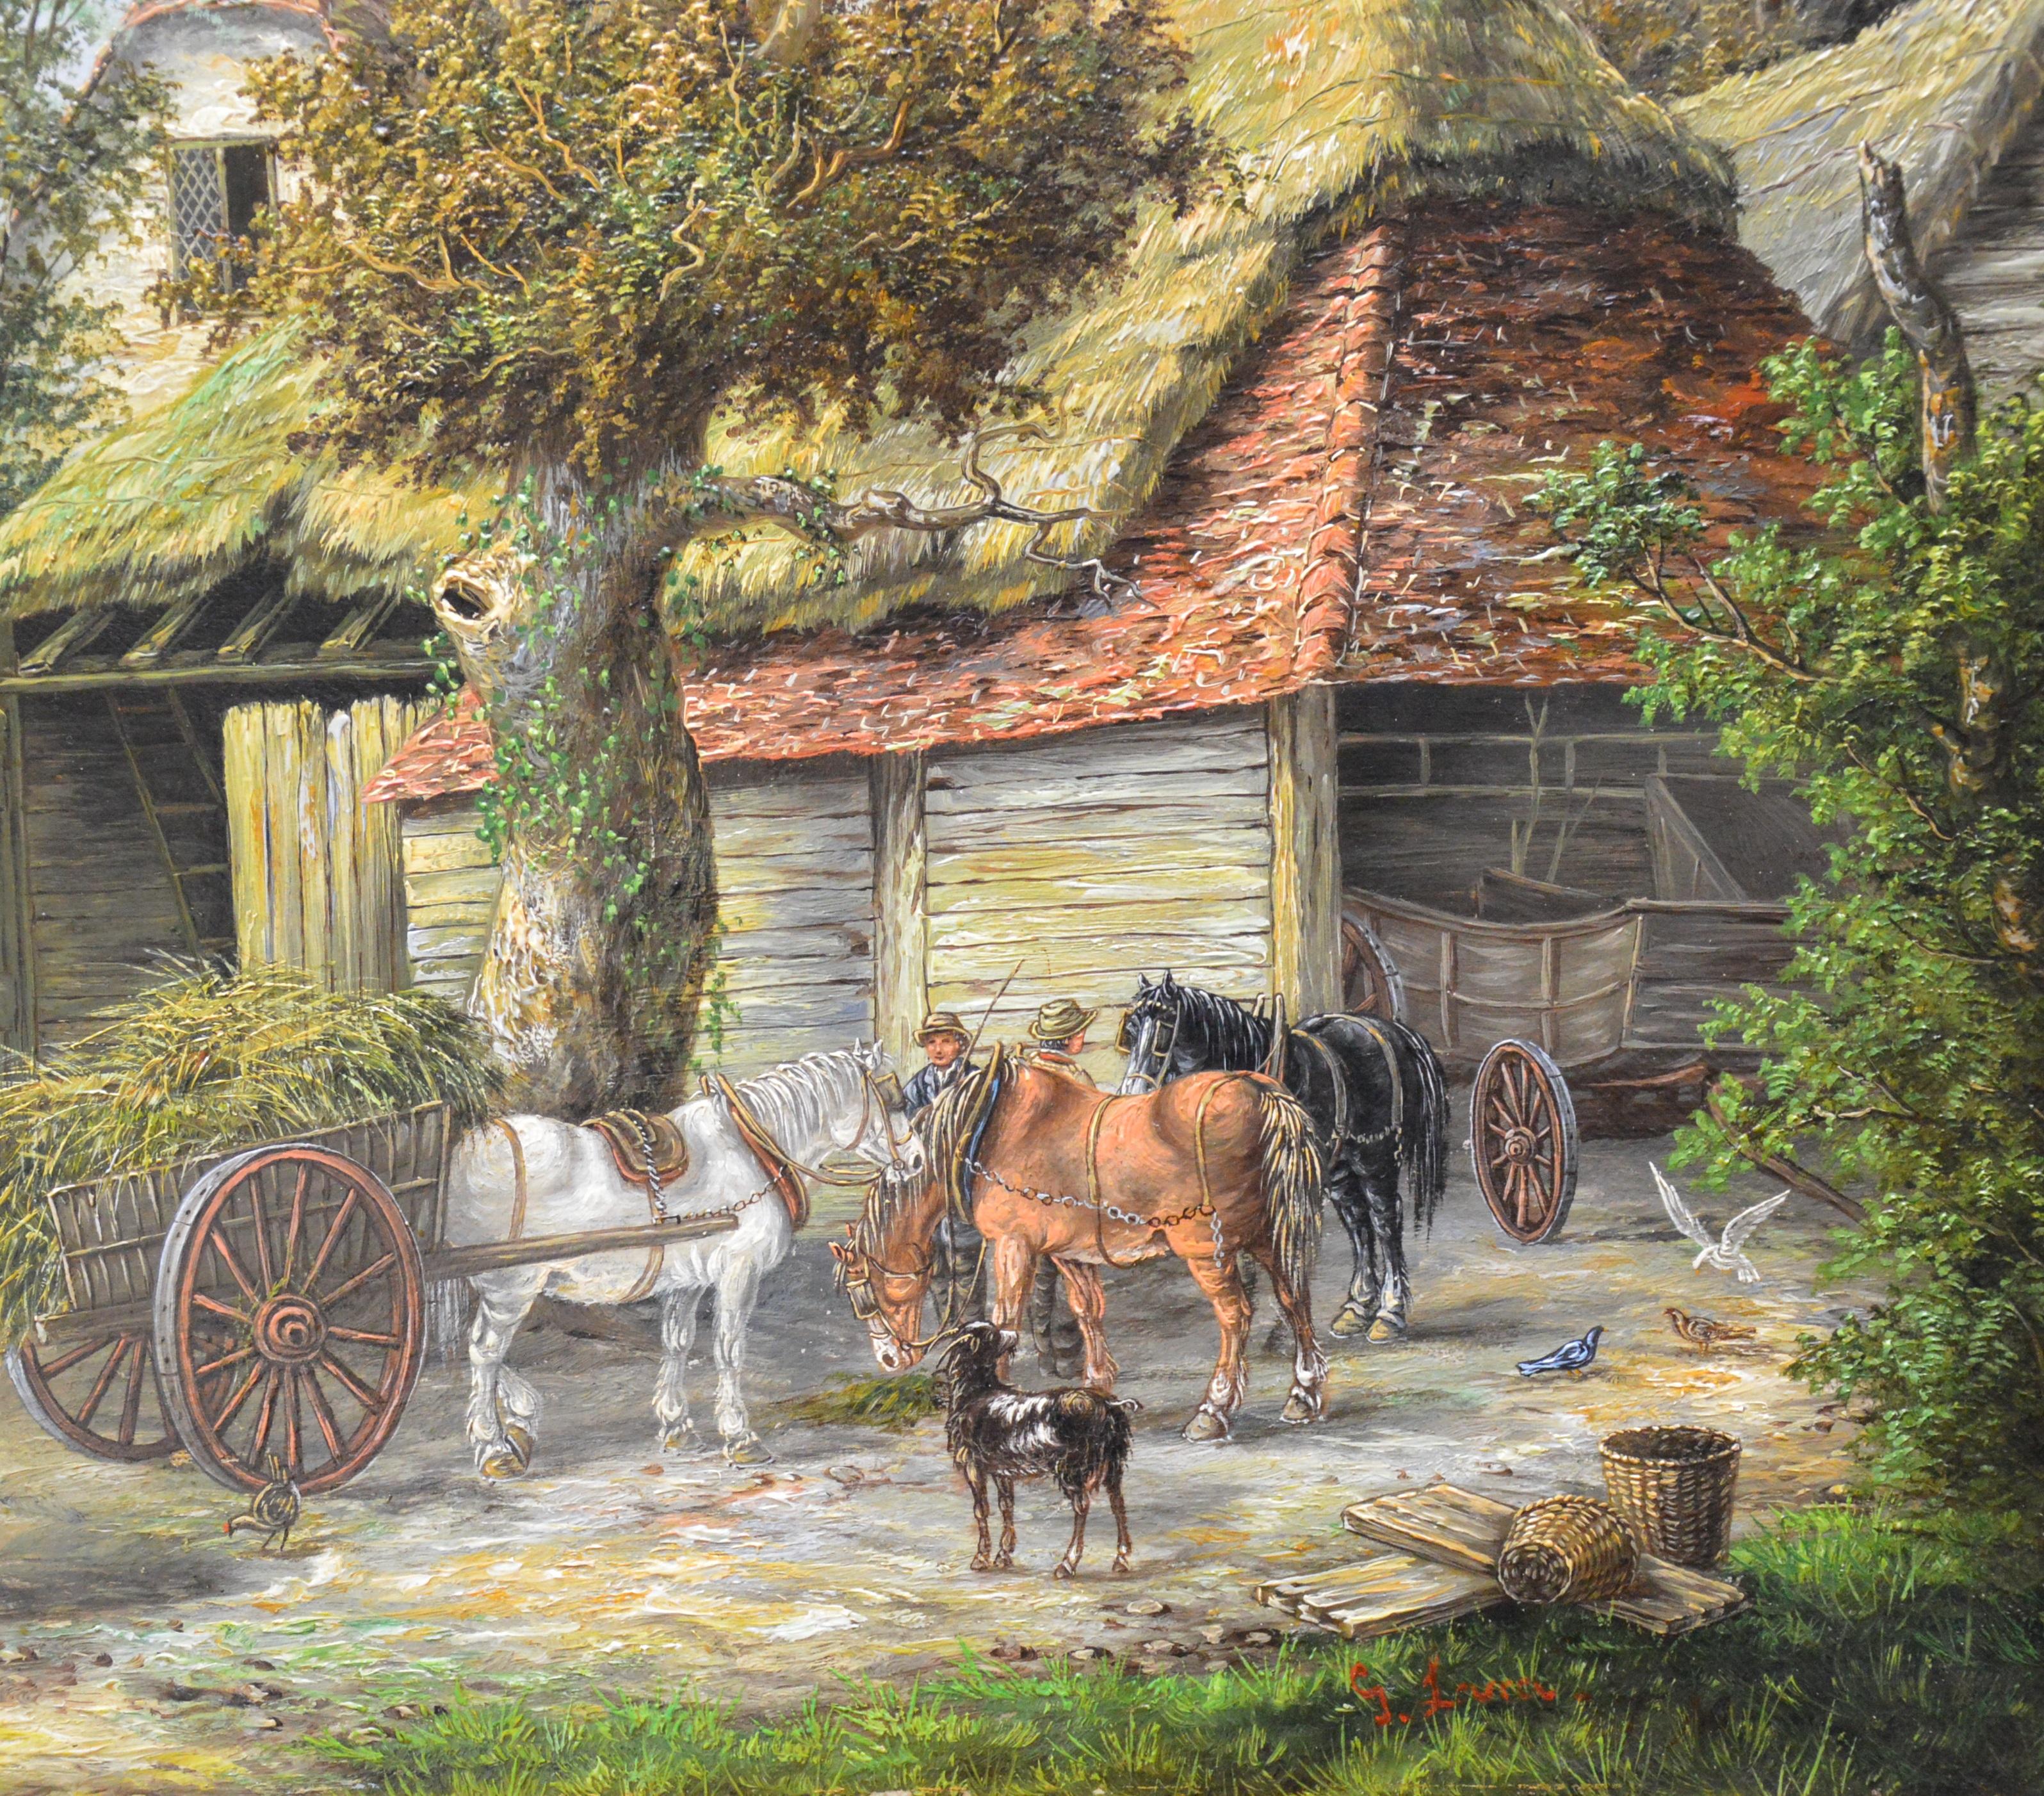 A large fine 19th century landscape oil on canvas depicting many figures and animals in a small Victorian village in ‘Midsummer’ by the very popular landscape painter Georgina Lara (1845-1930). The painting is signed by the artist and hangs in a